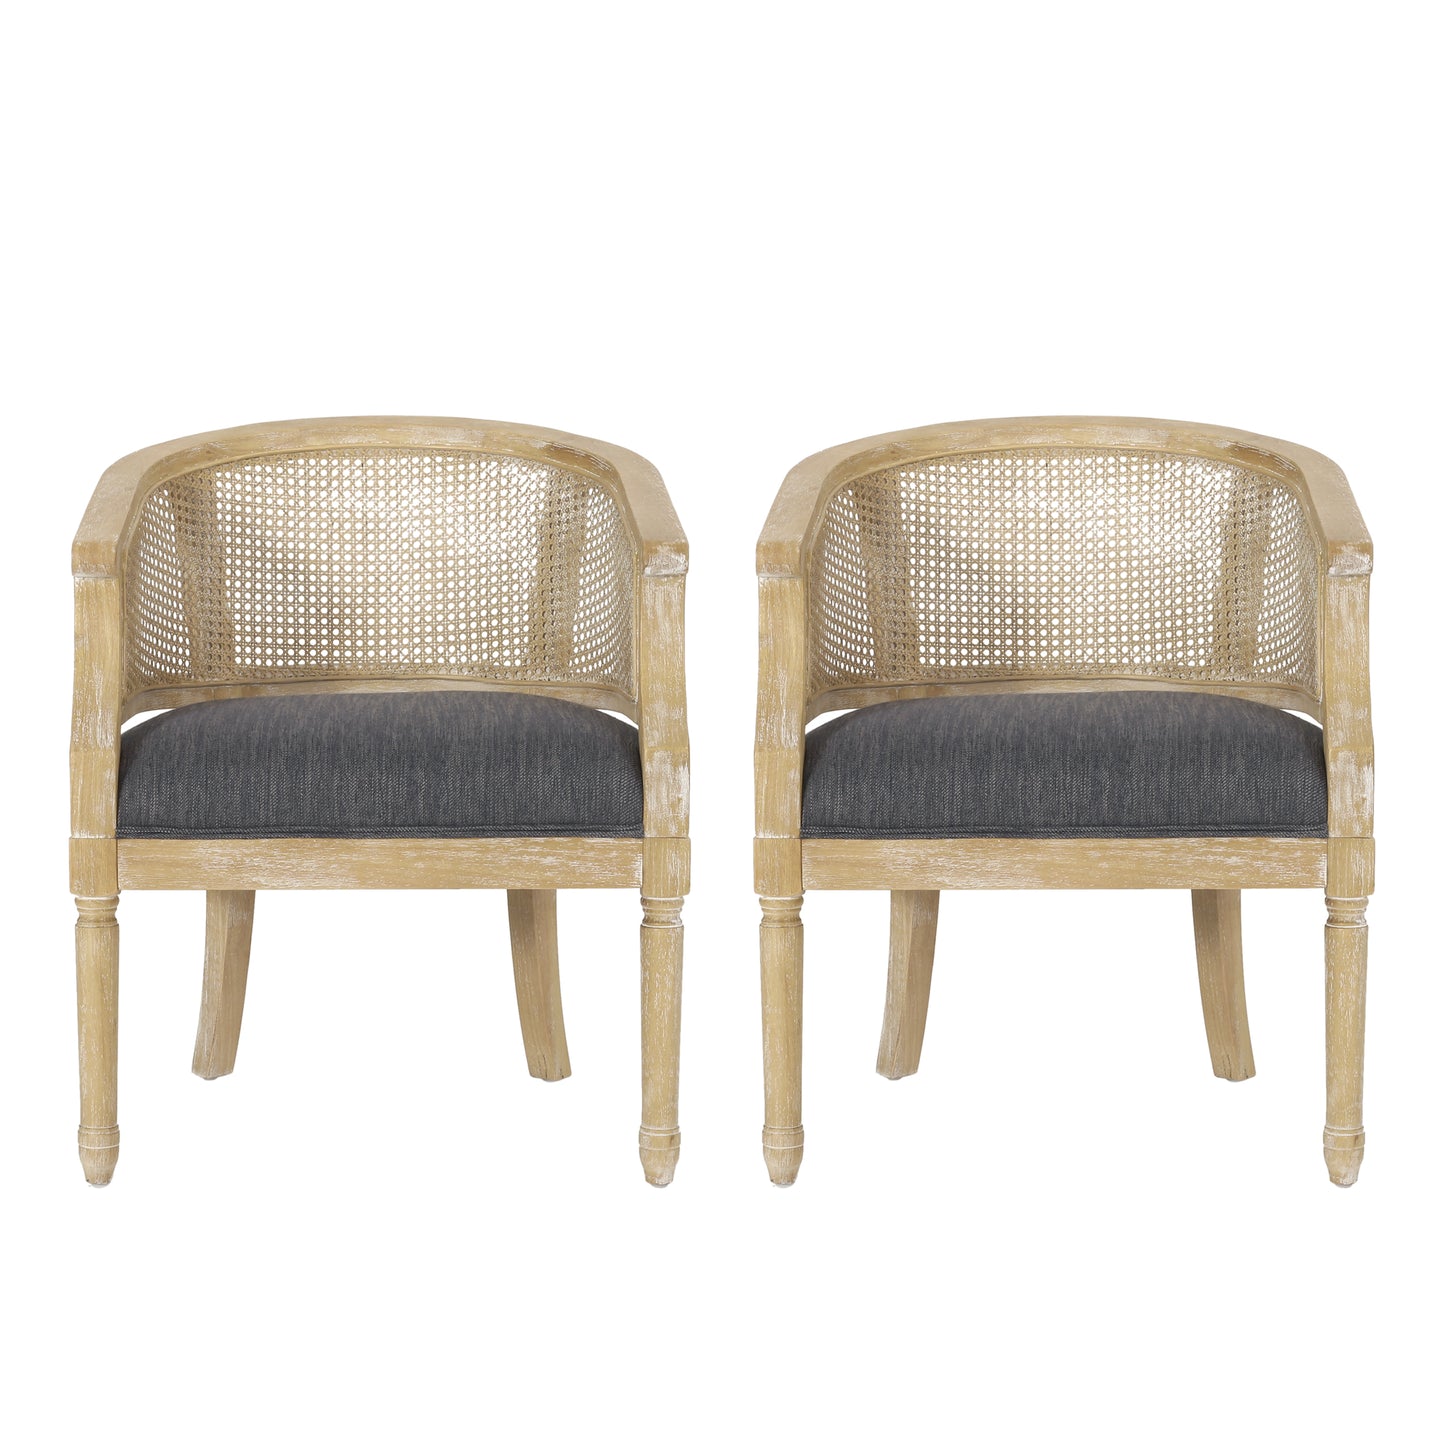 Velie French Country Wood and Cane Accent Chairs, Set of 2